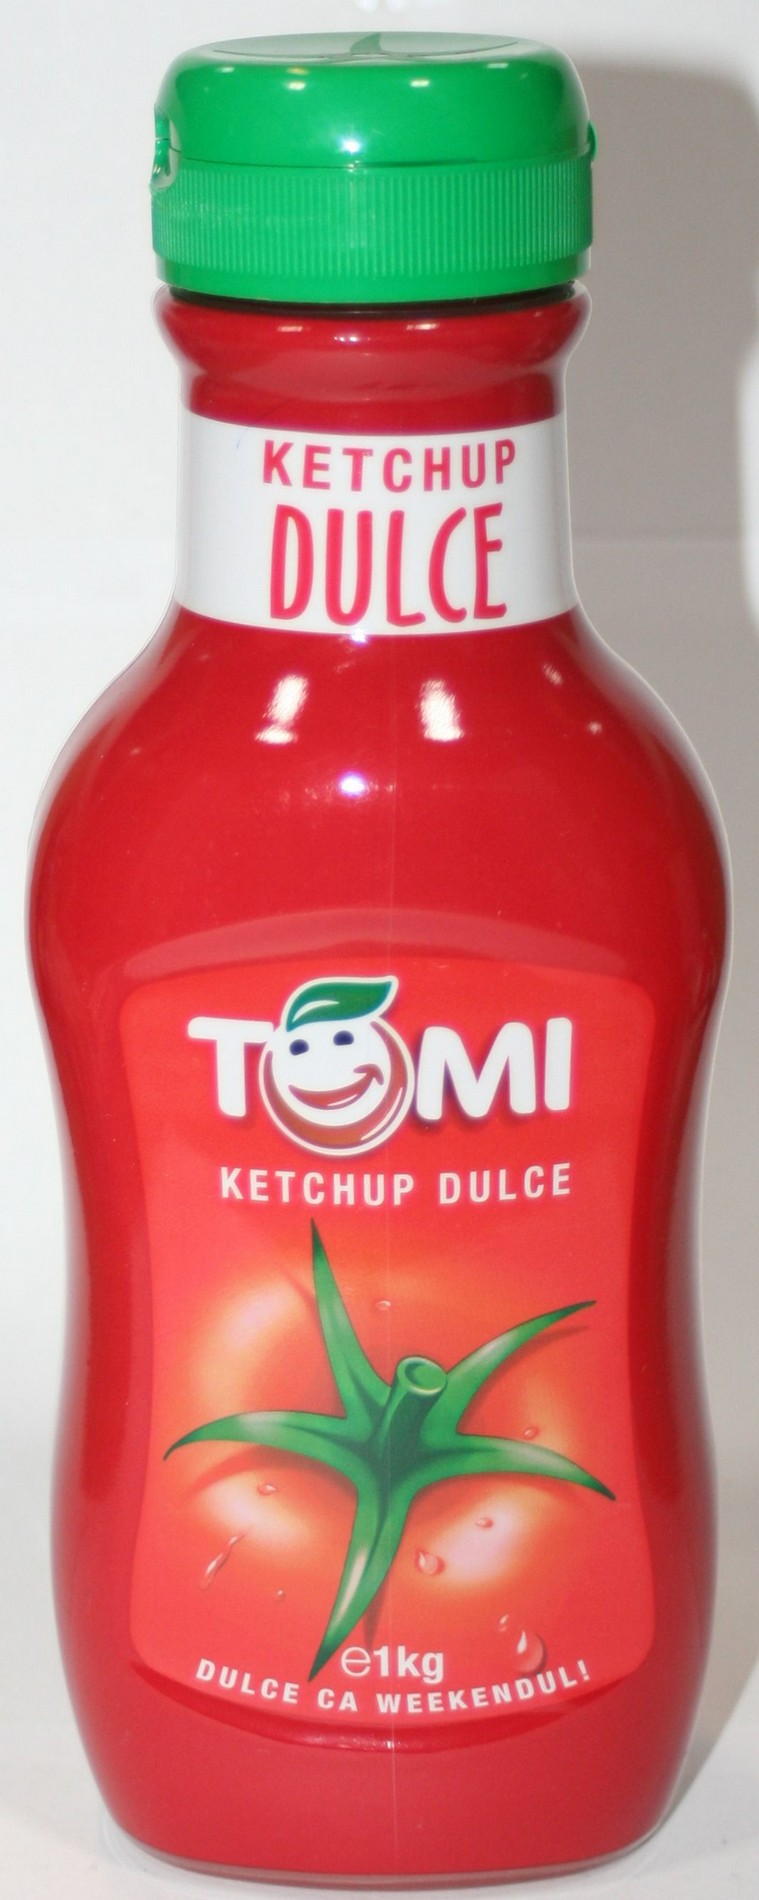 KETCHUP DULCE TOMI 1KG # 6 buc